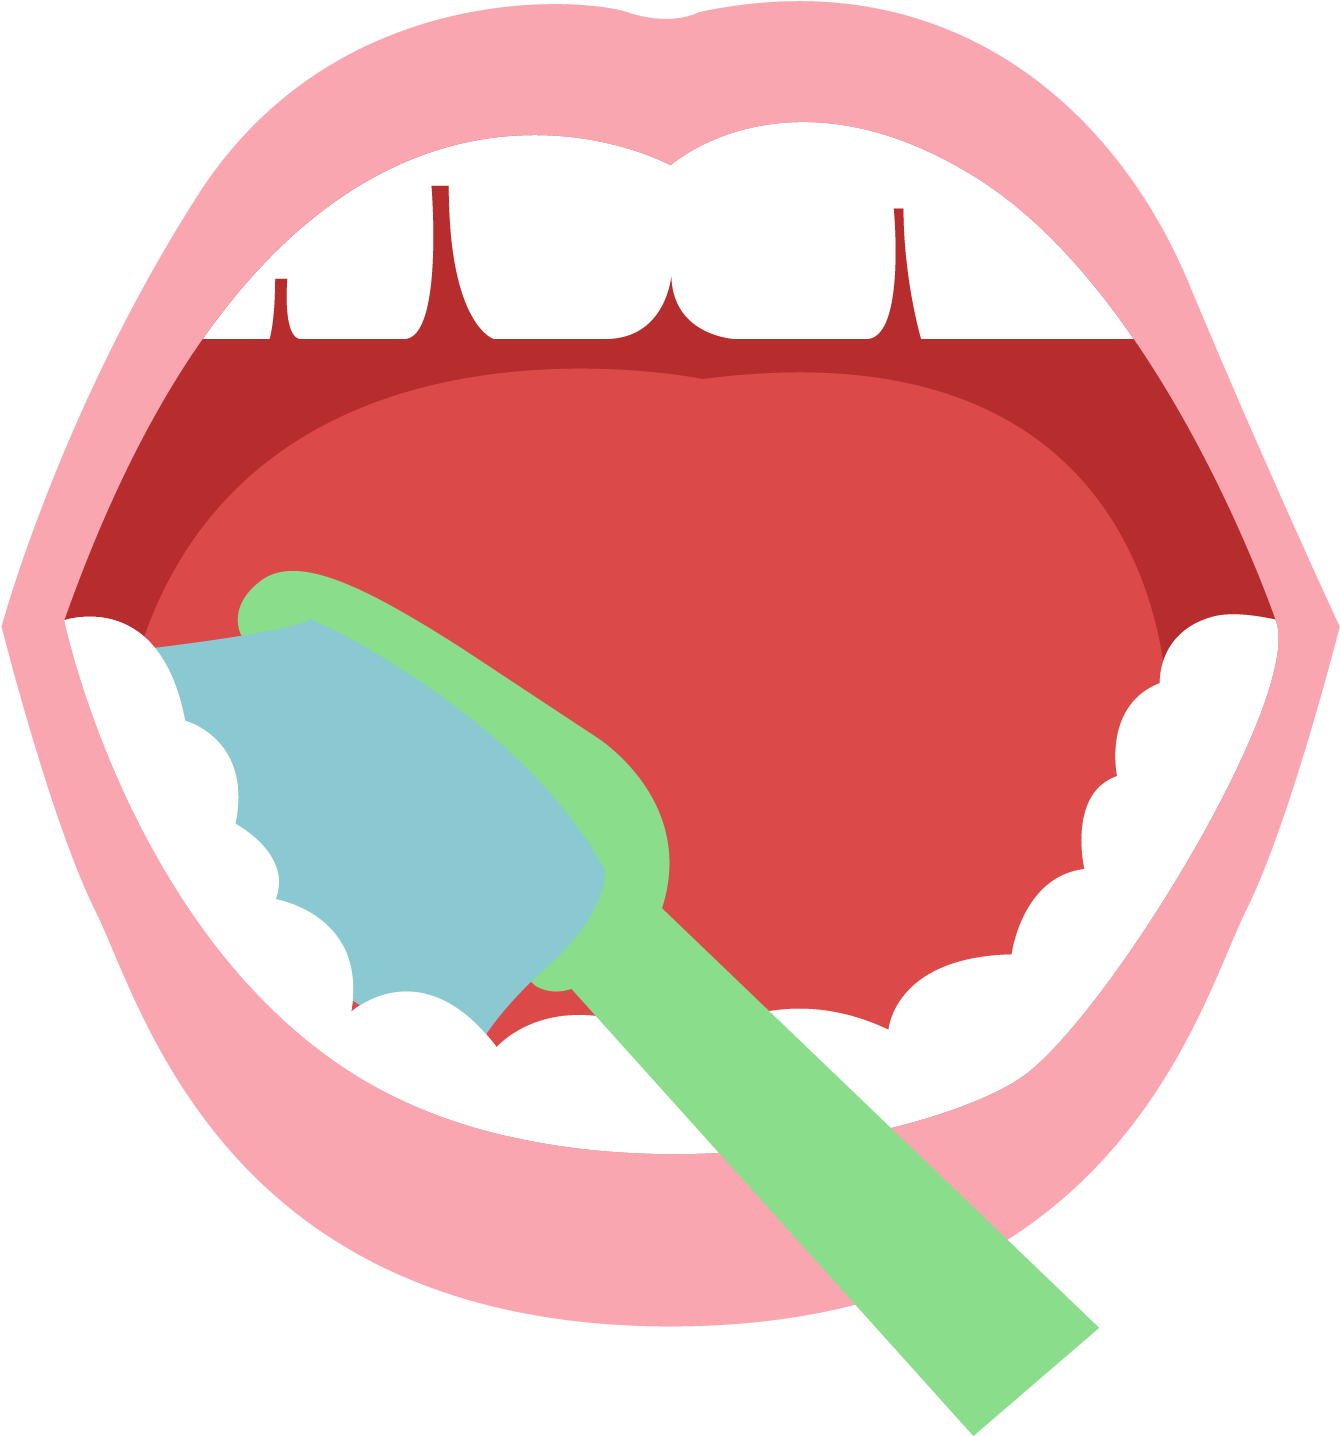 Tooth Brushing Toothbrush Clip Art - Portrait Of A Man.